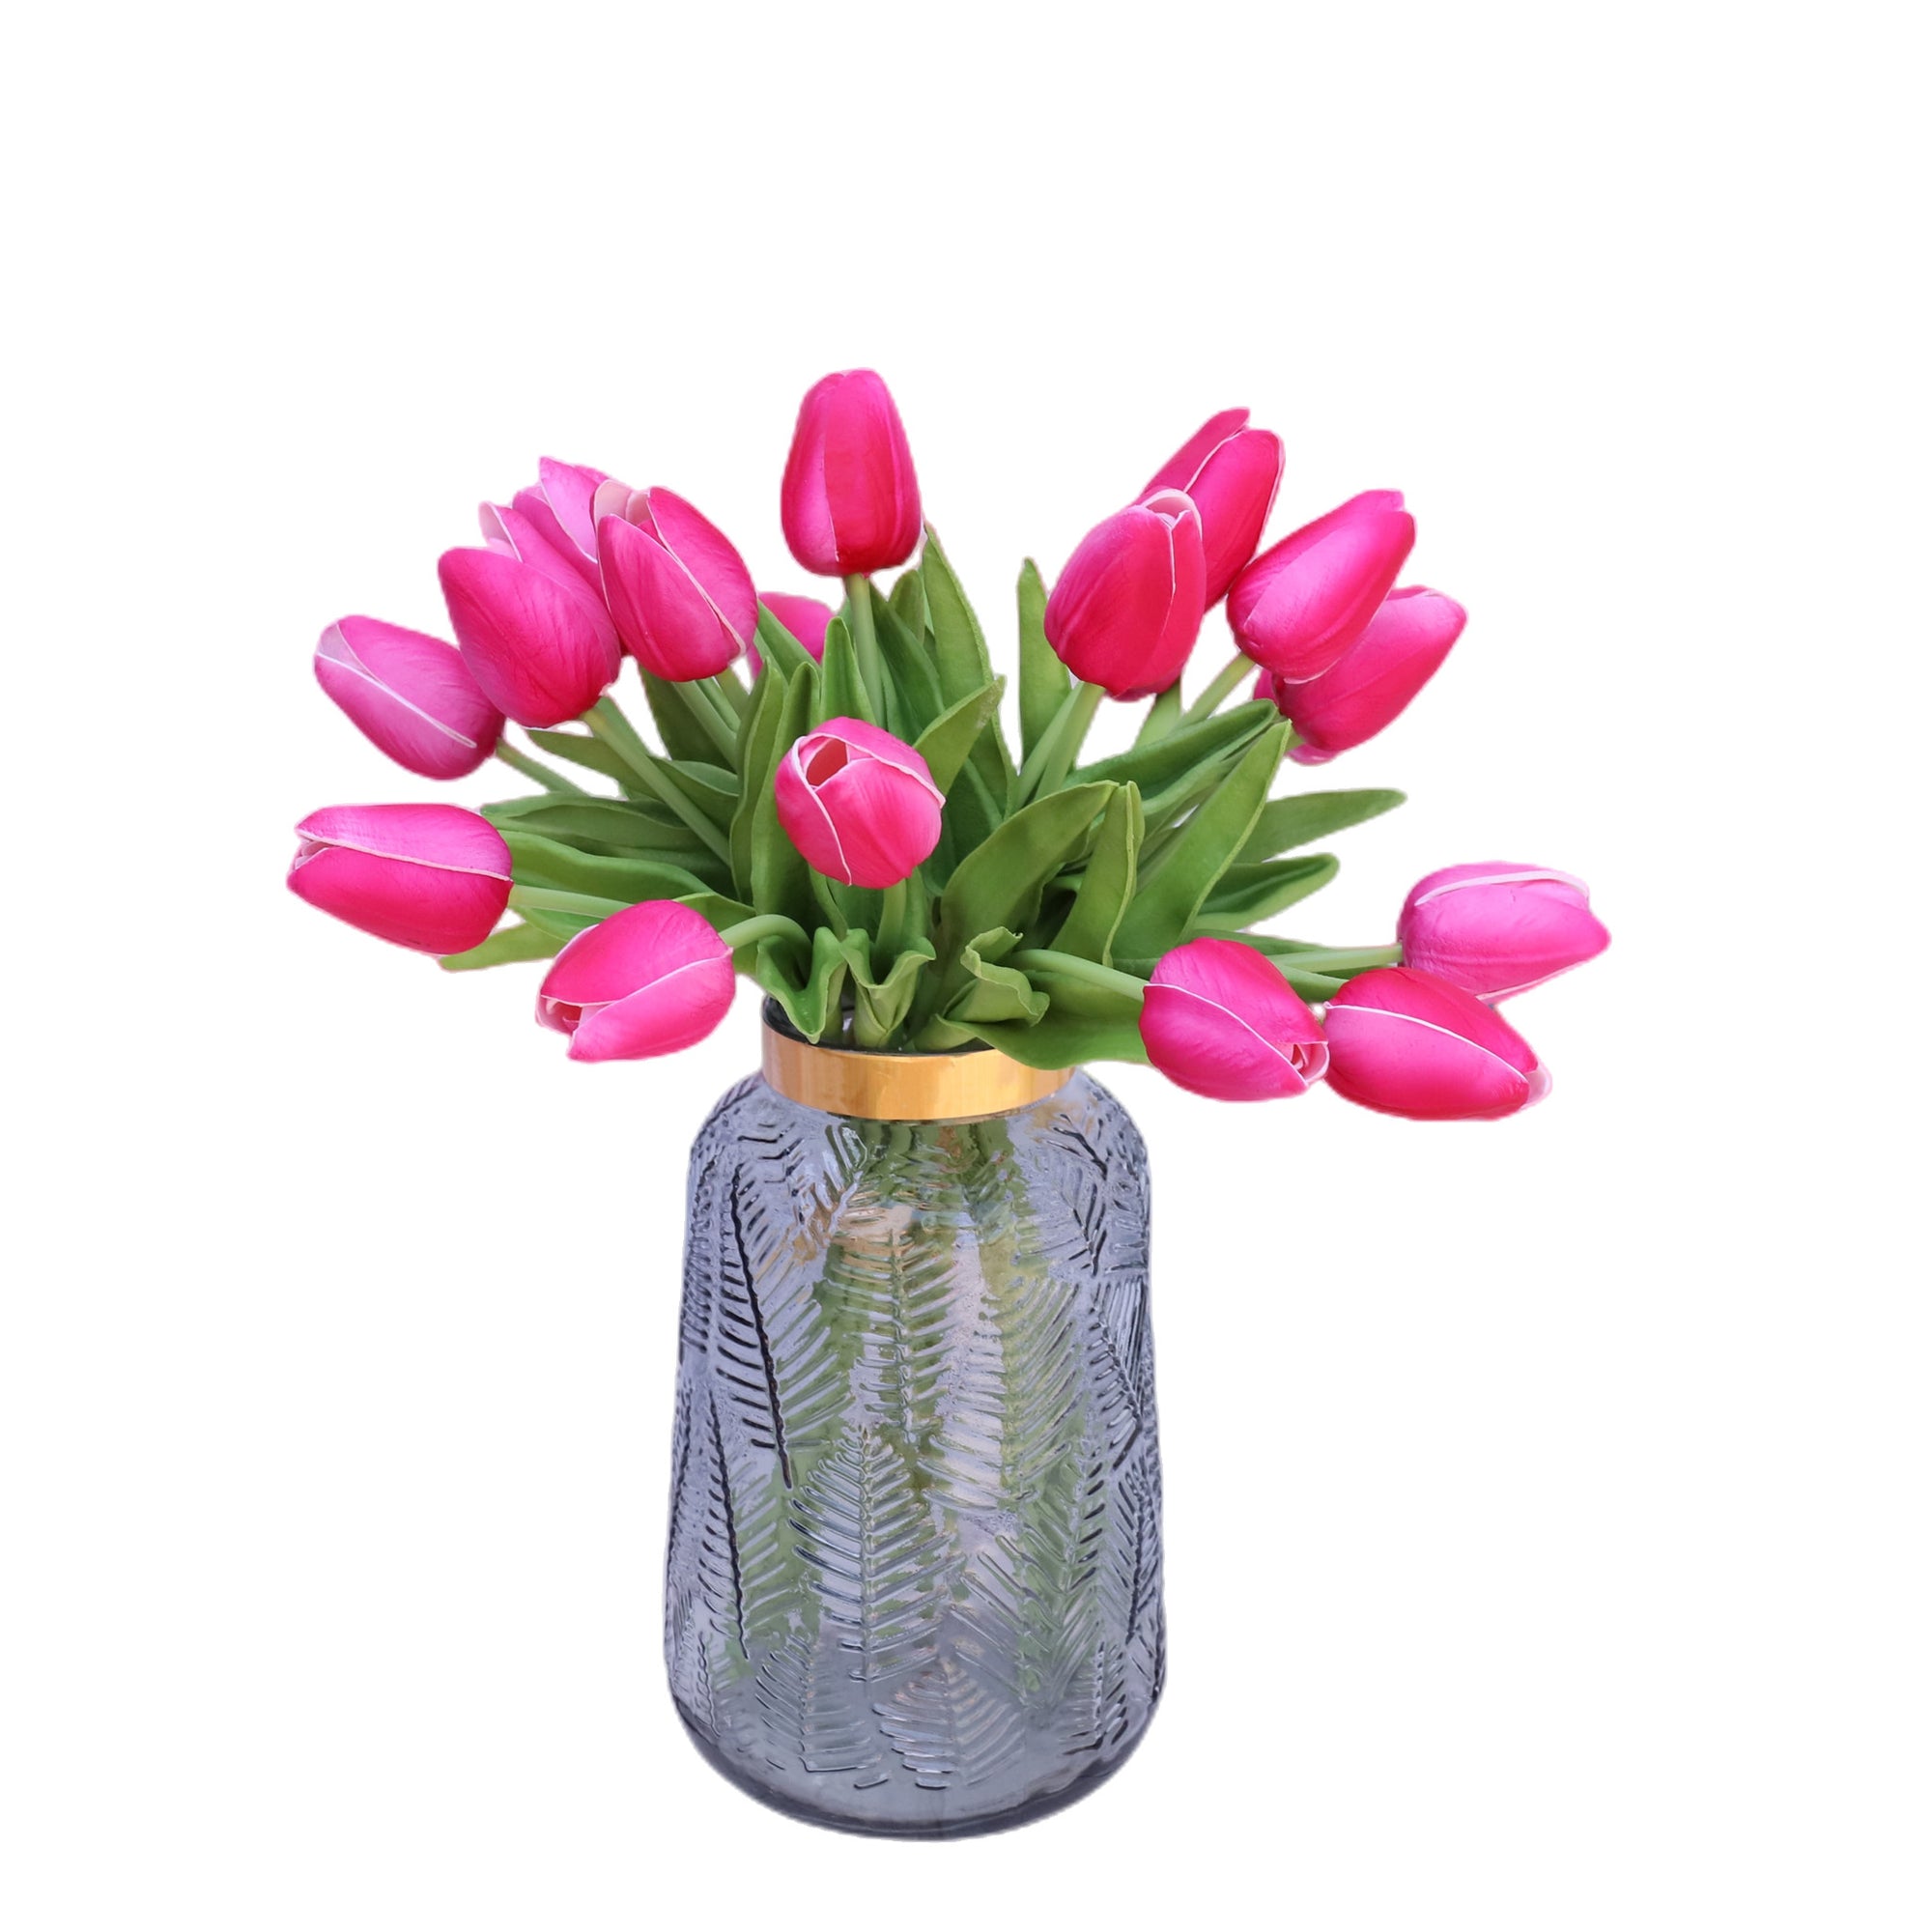 Fake Tulips Bouquet Real Touch Tulips